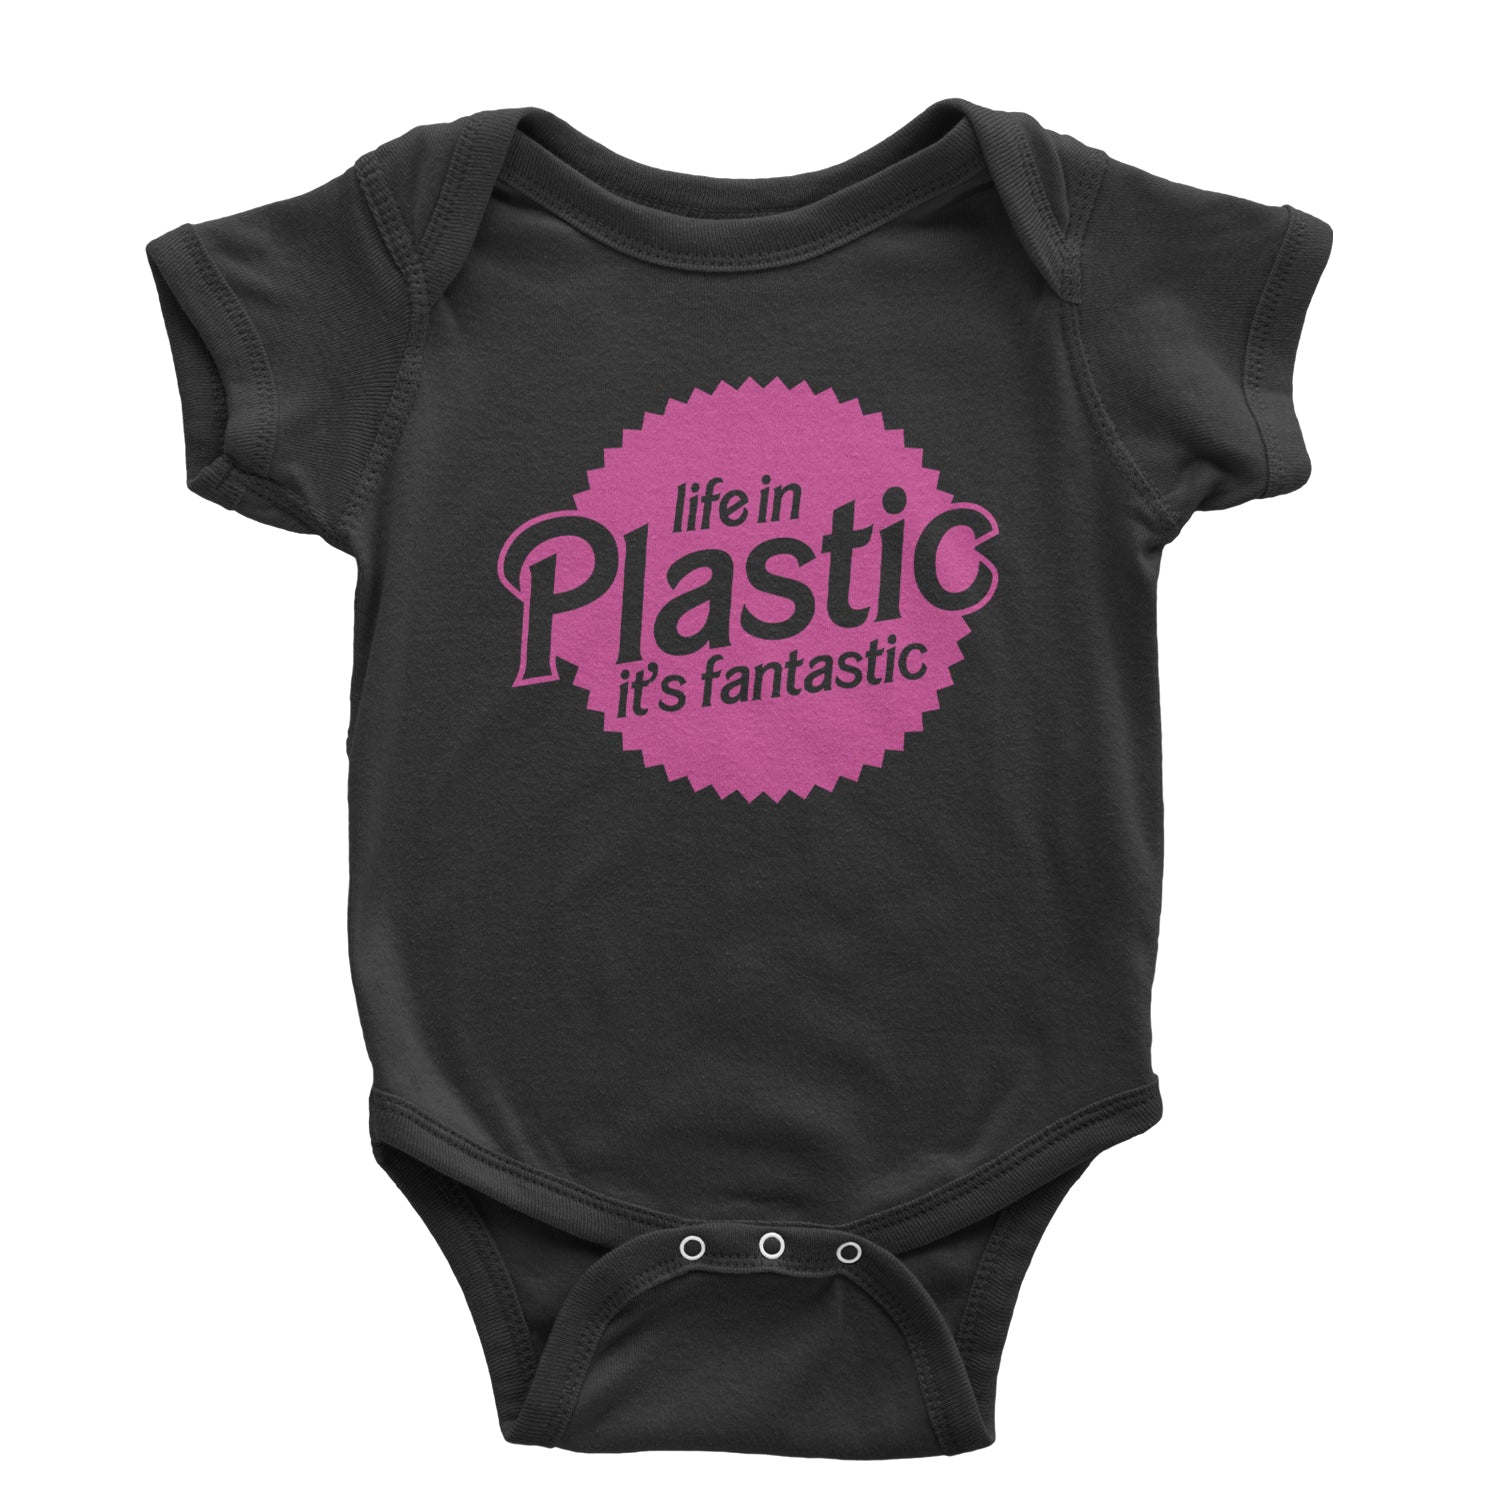 Life In Plastic It's Fantastic Barbenheimer Infant One-Piece Romper Bodysuit and Toddler T-shirt